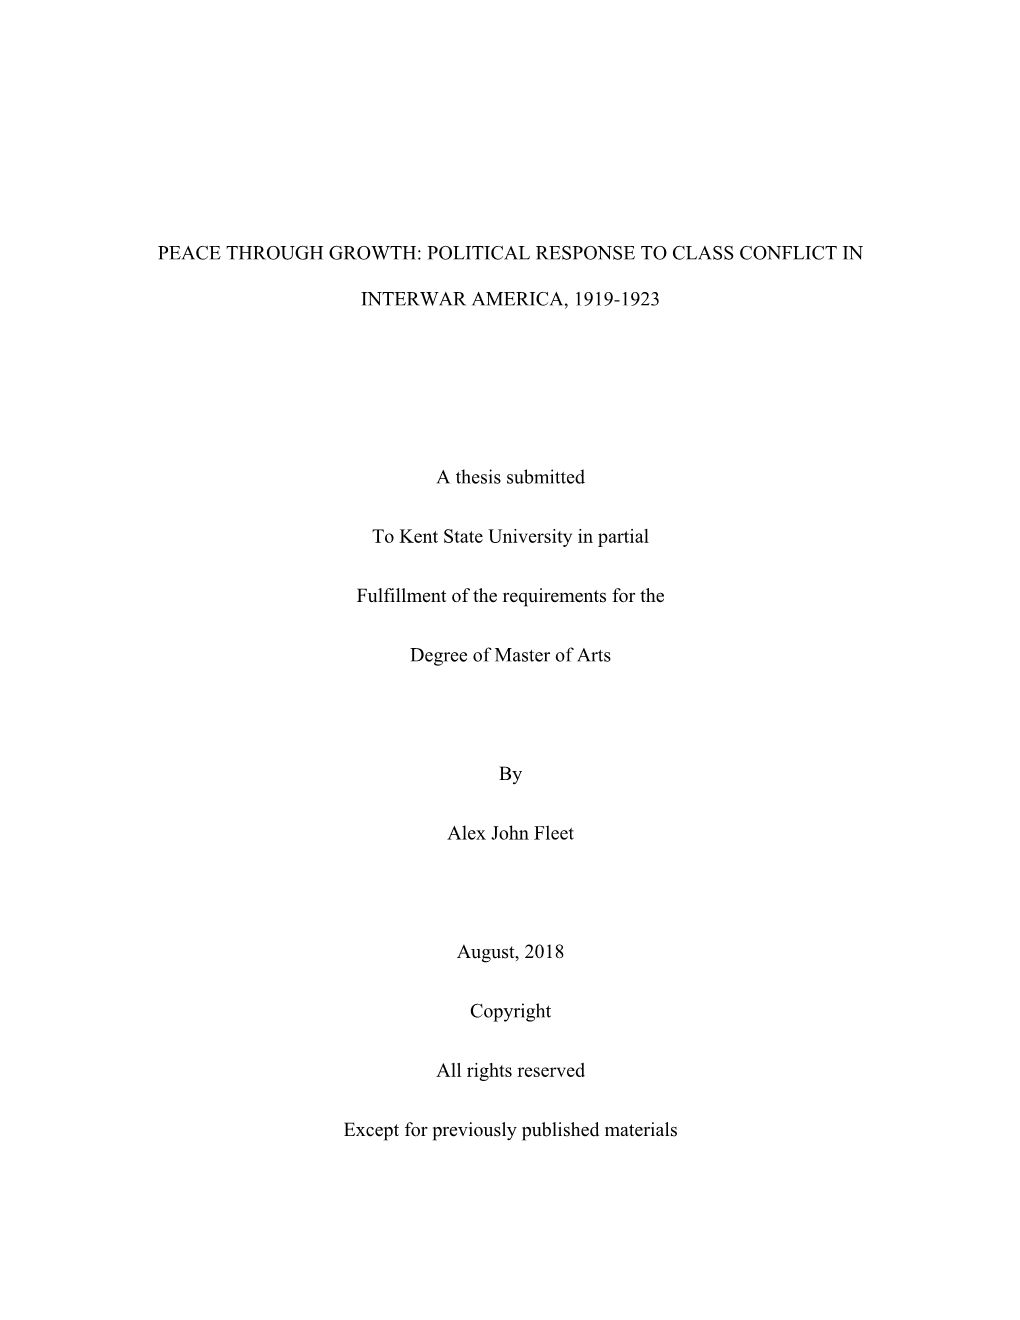 PEACE THROUGH GROWTH: POLITICAL RESPONSE to CLASS CONFLICT in INTERWAR AMERICA, 1919-1923 a Thesis Submitted to Kent State Unive